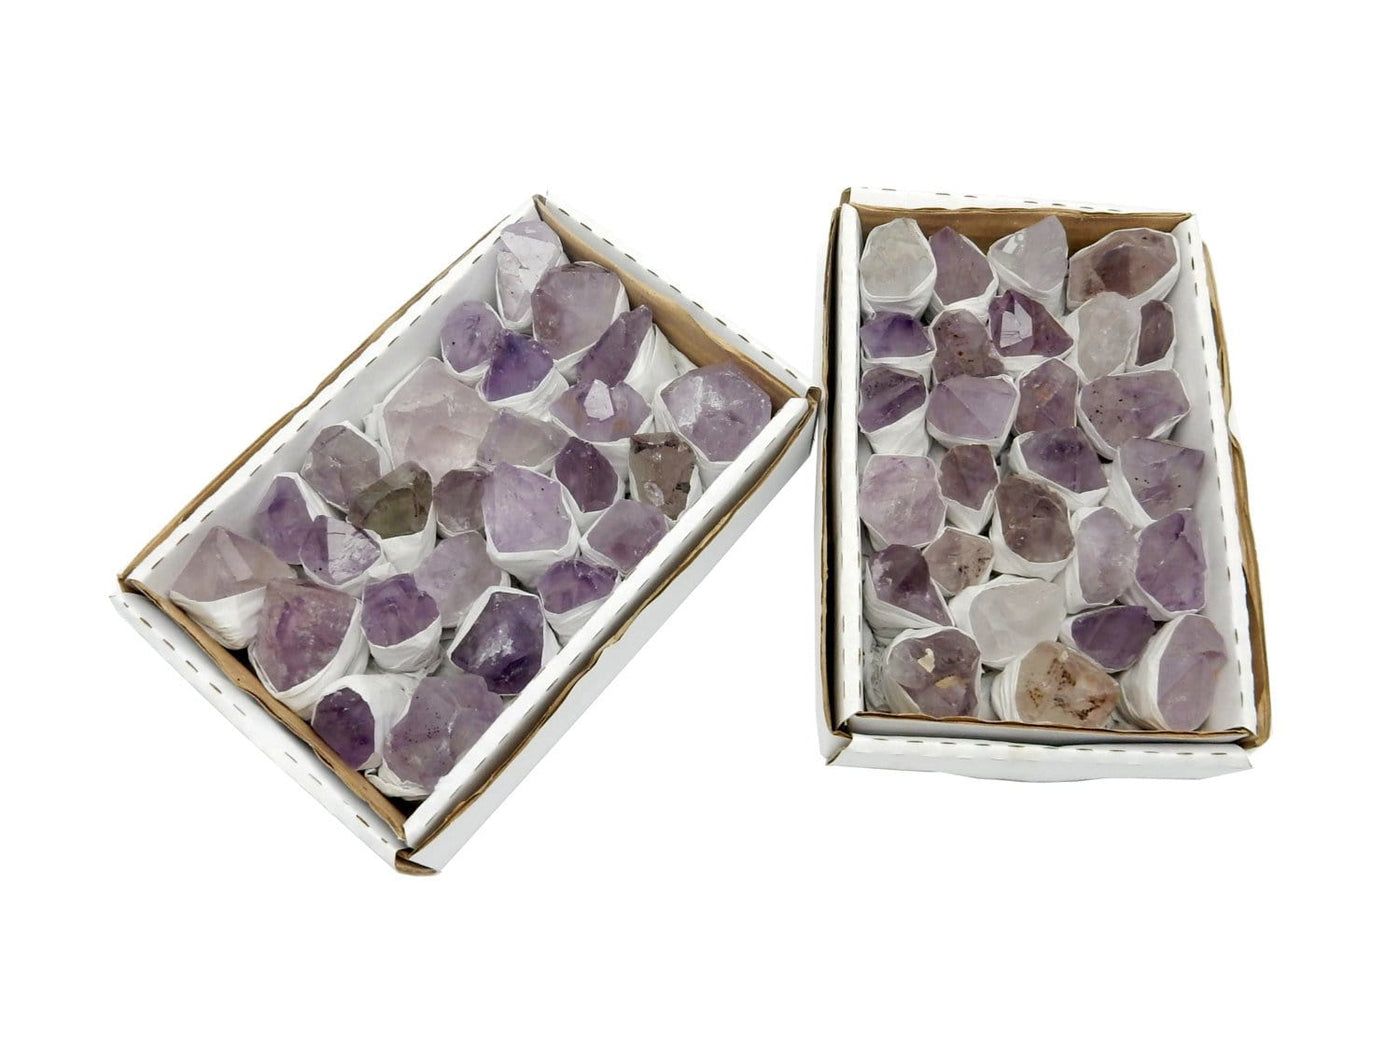 2 full amethyst point boxes displayed on a white background.